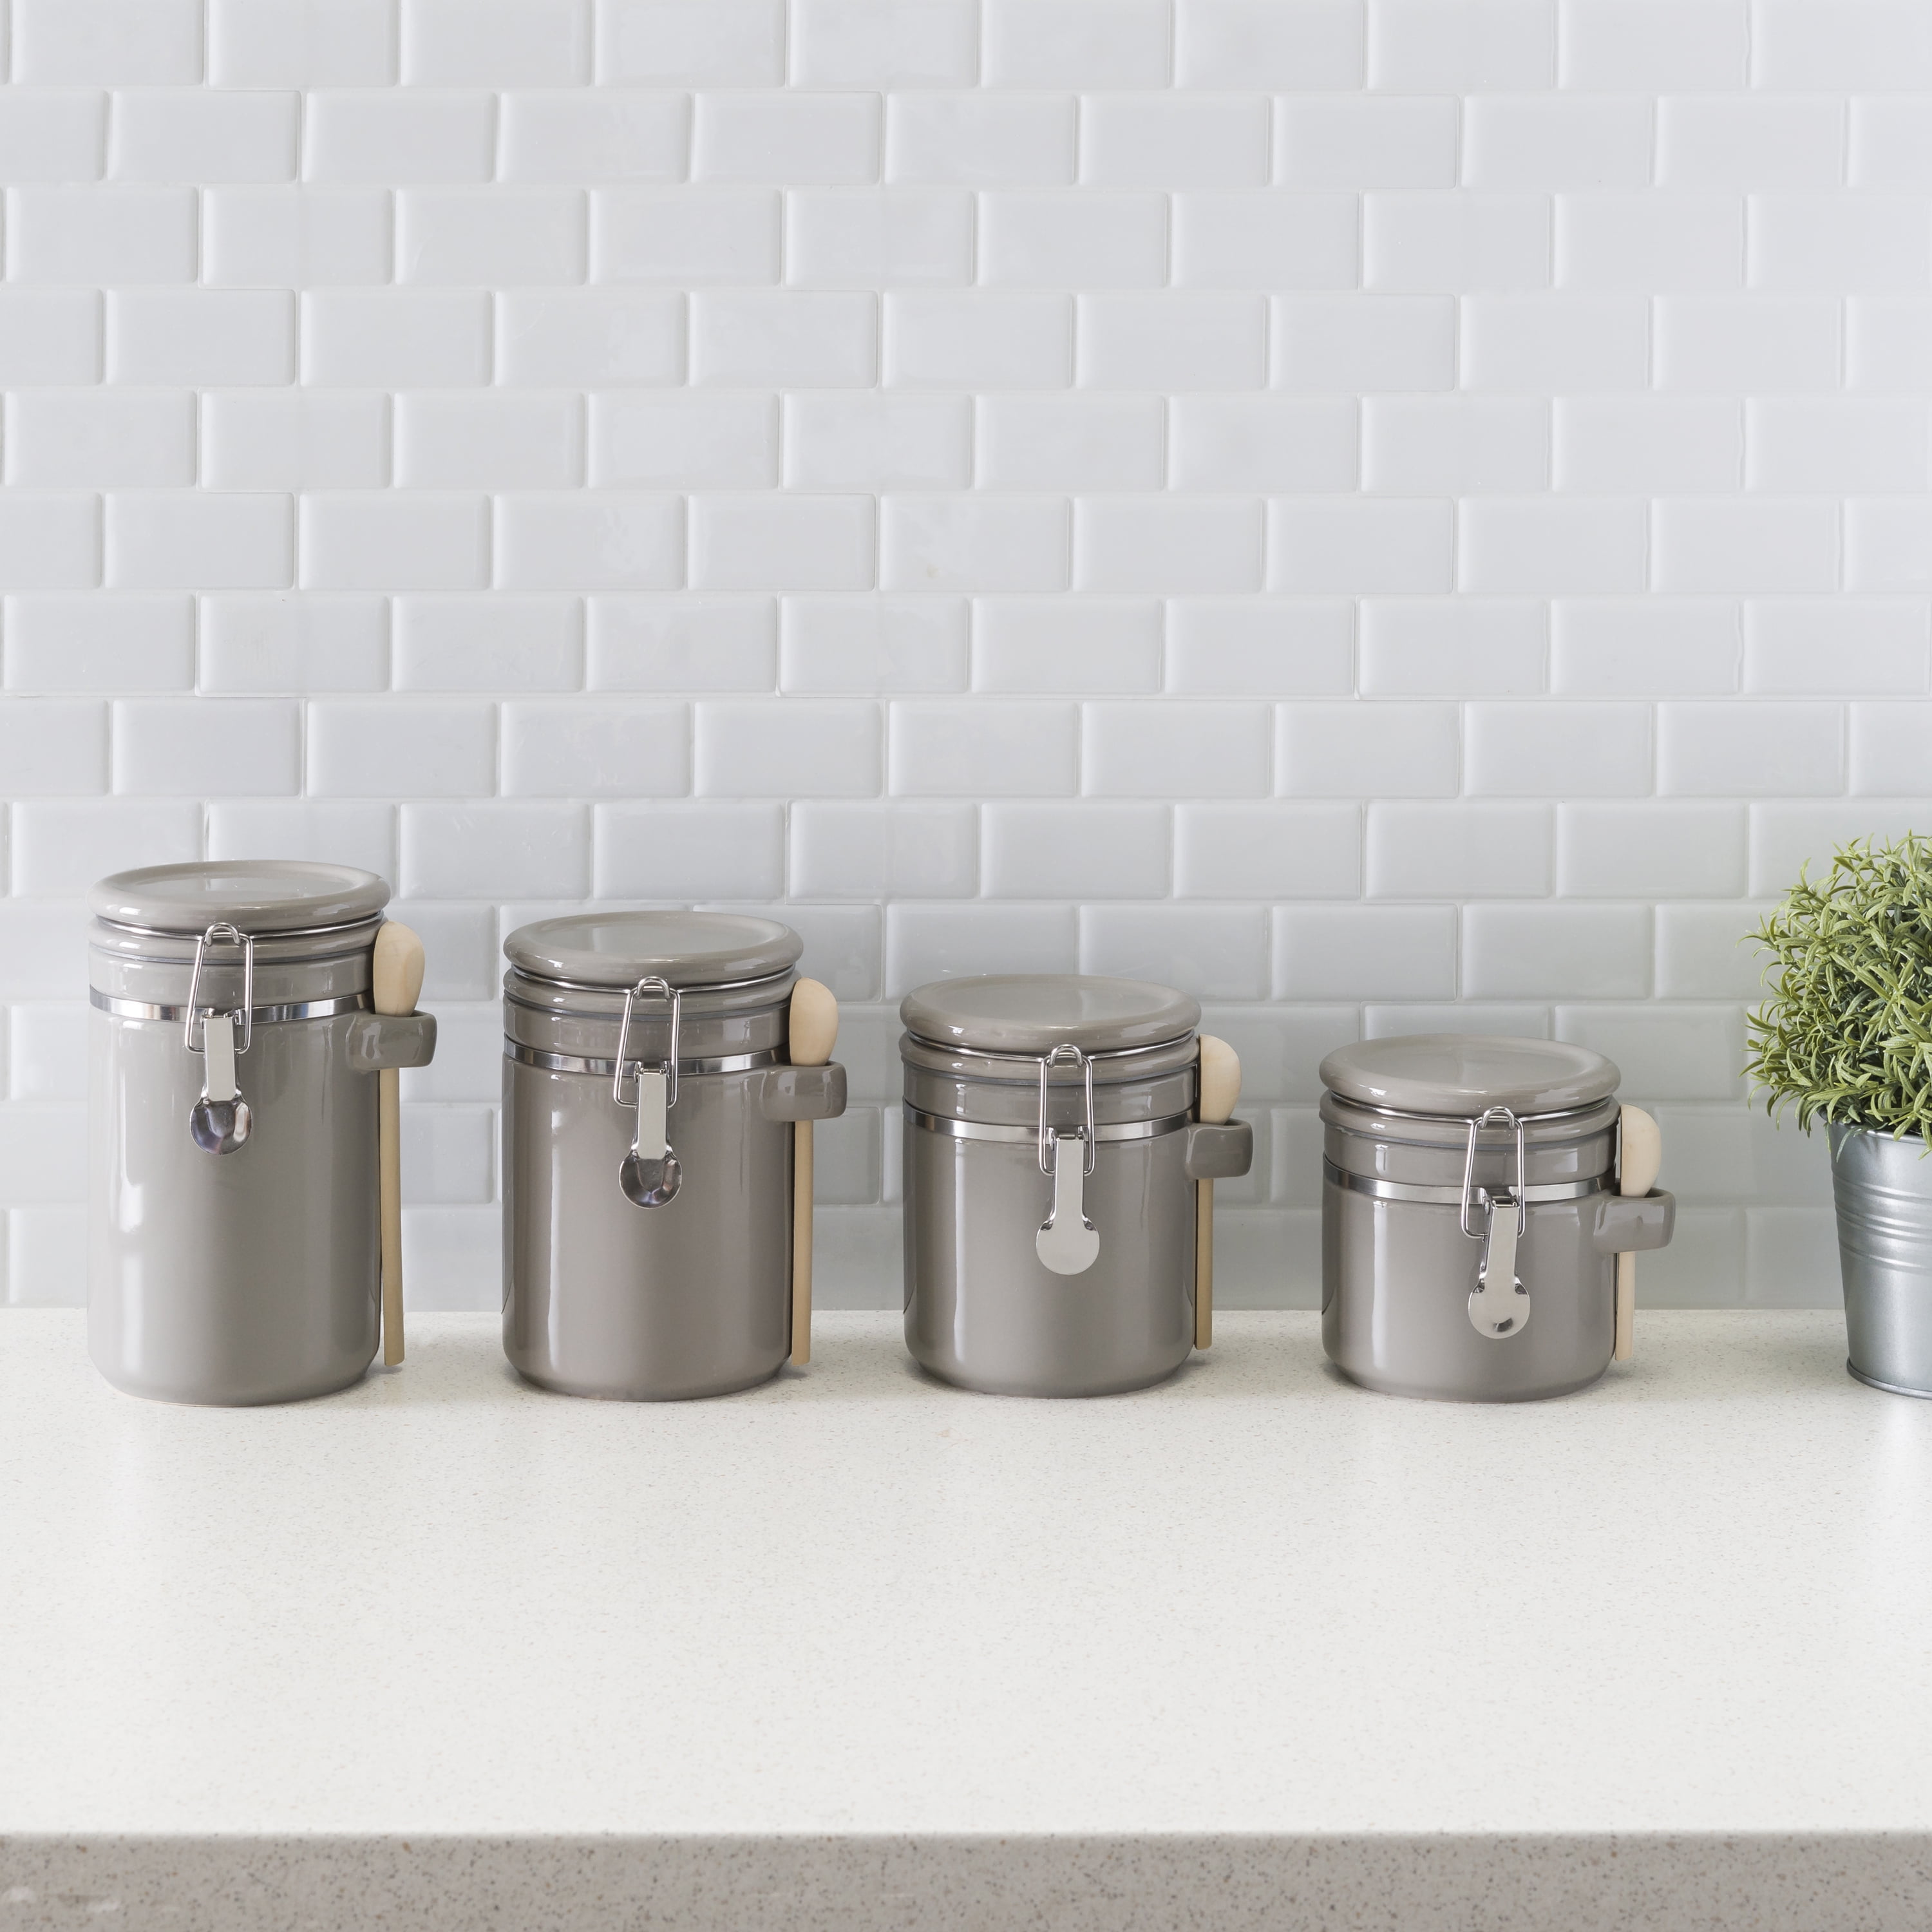 4-Piece Set Ceramic Canisters with Air-Tight Clamp-Top Lids and Wooden Spoons